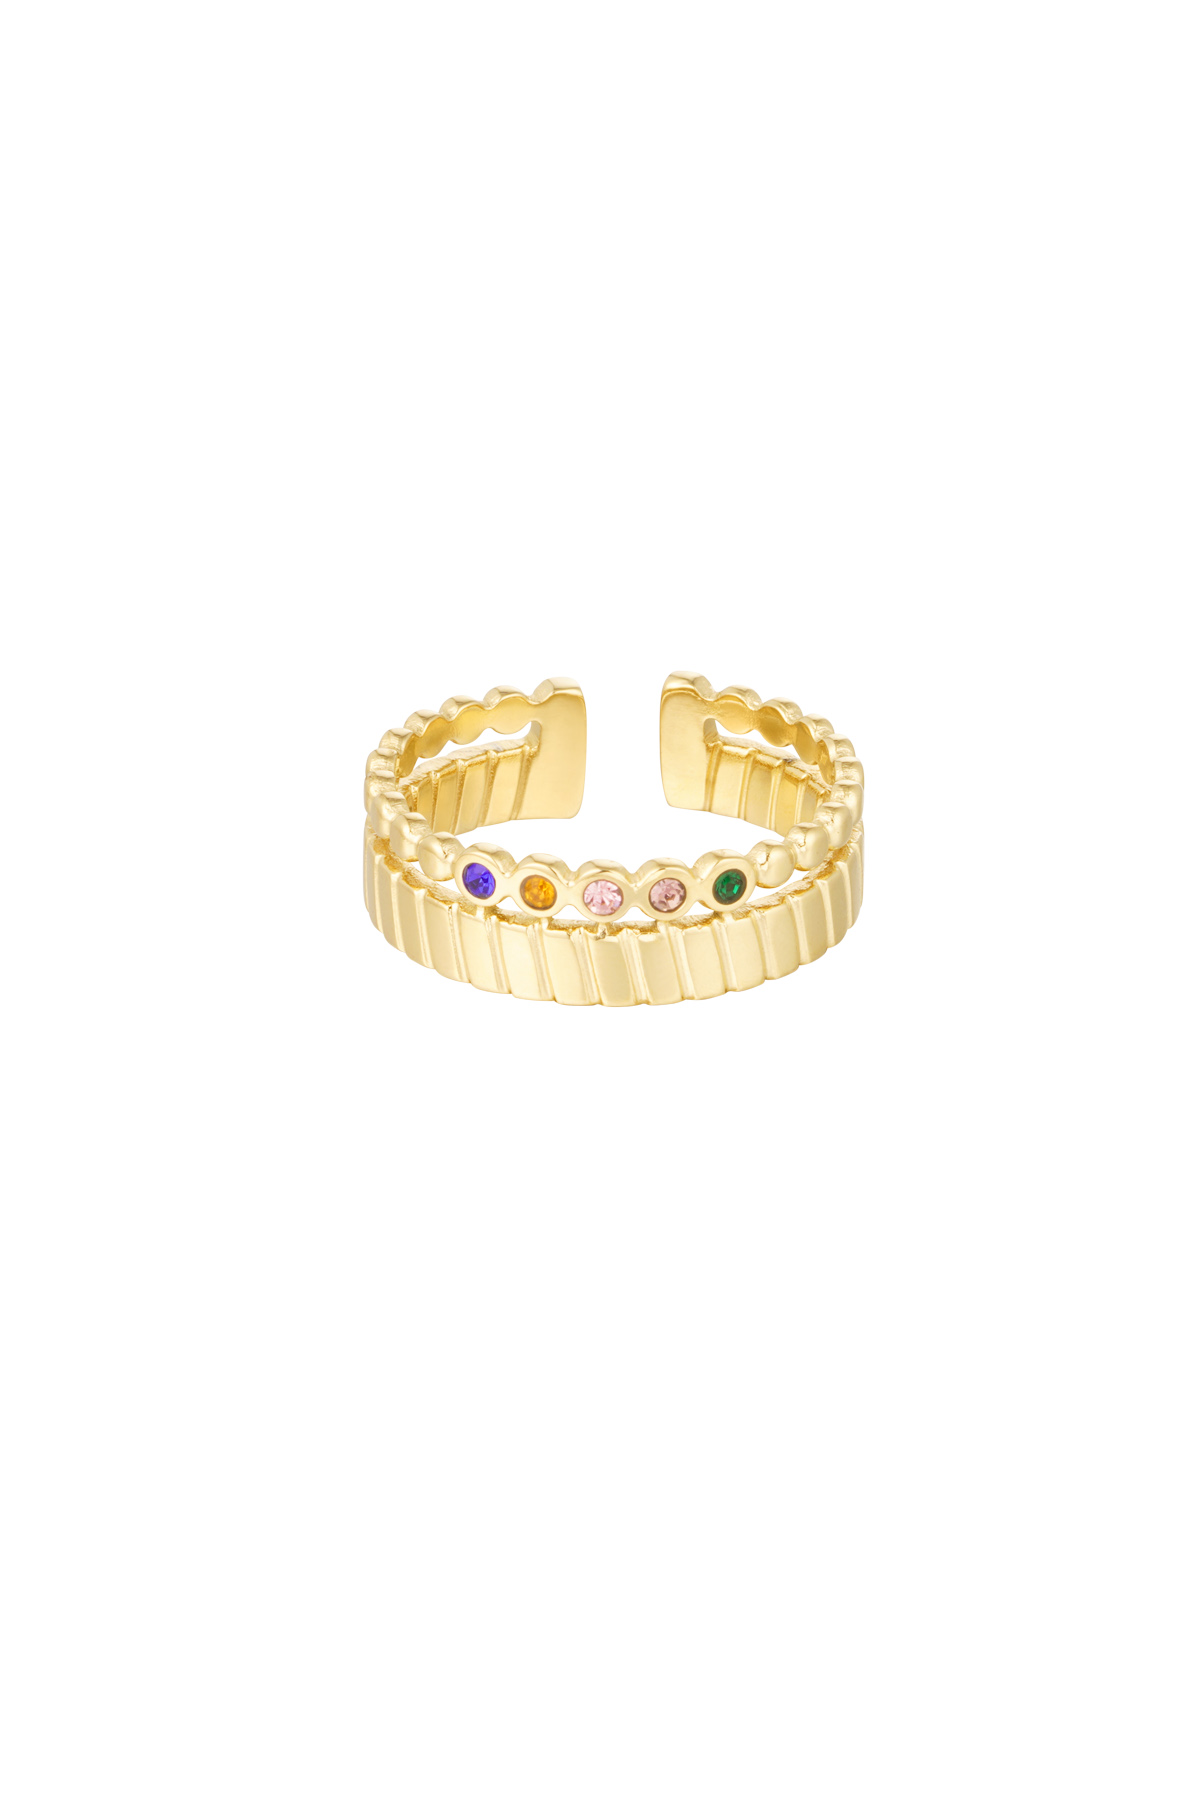 Ring stripes with stones - gold/multi